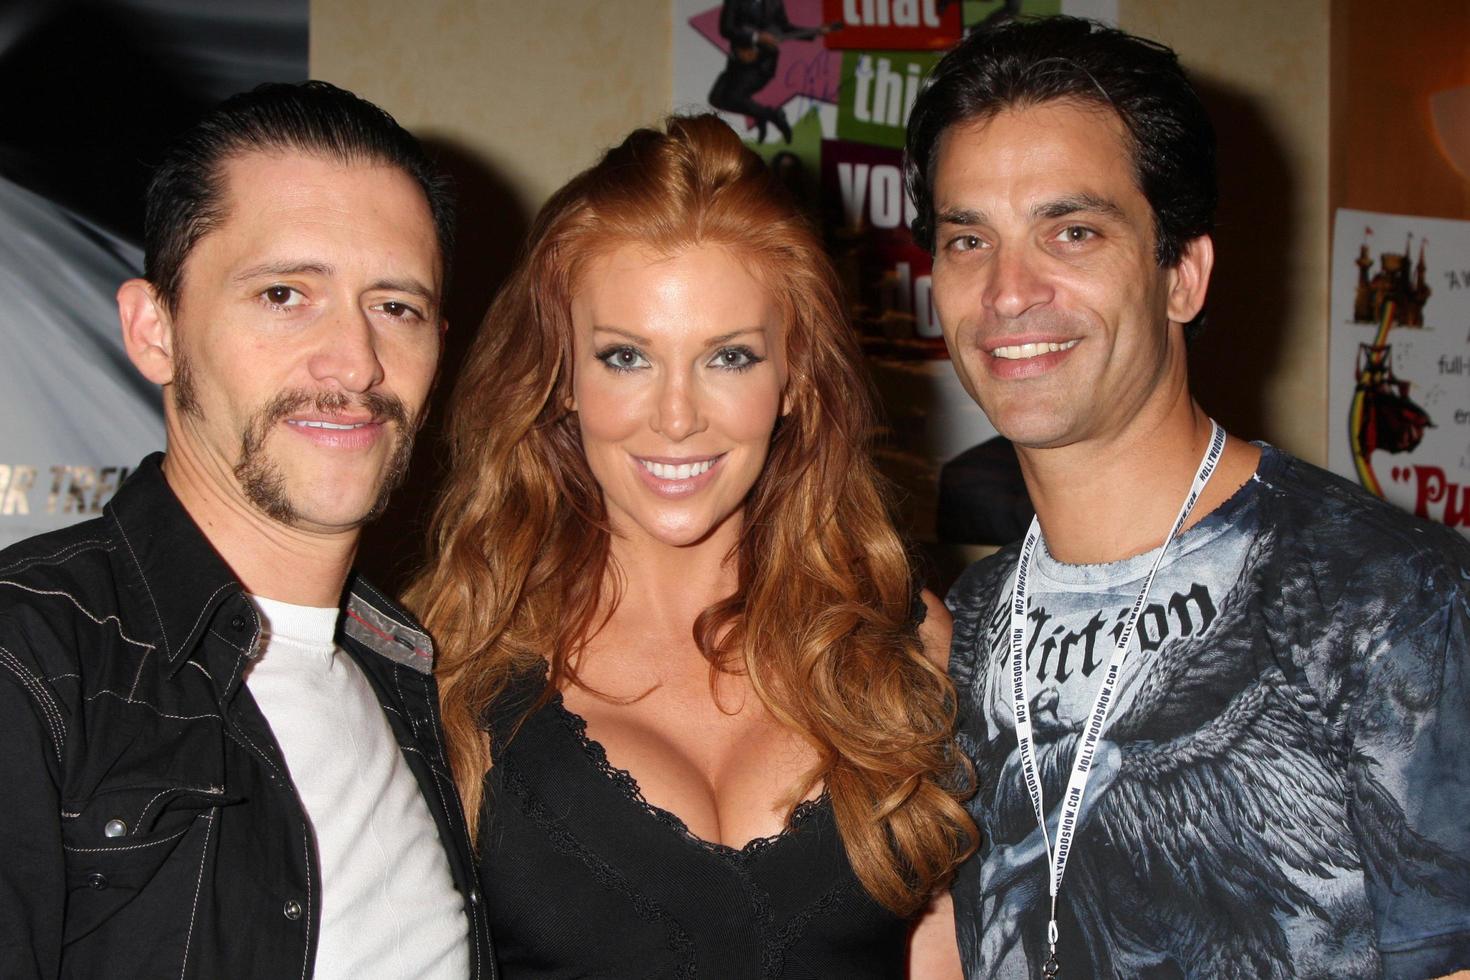 Clifton Collins Jr Anjelica Bridges  Johnathon Schaech at the Hollywood Collectors Show in Burbank  CA   on July 18 2009 2008 photo